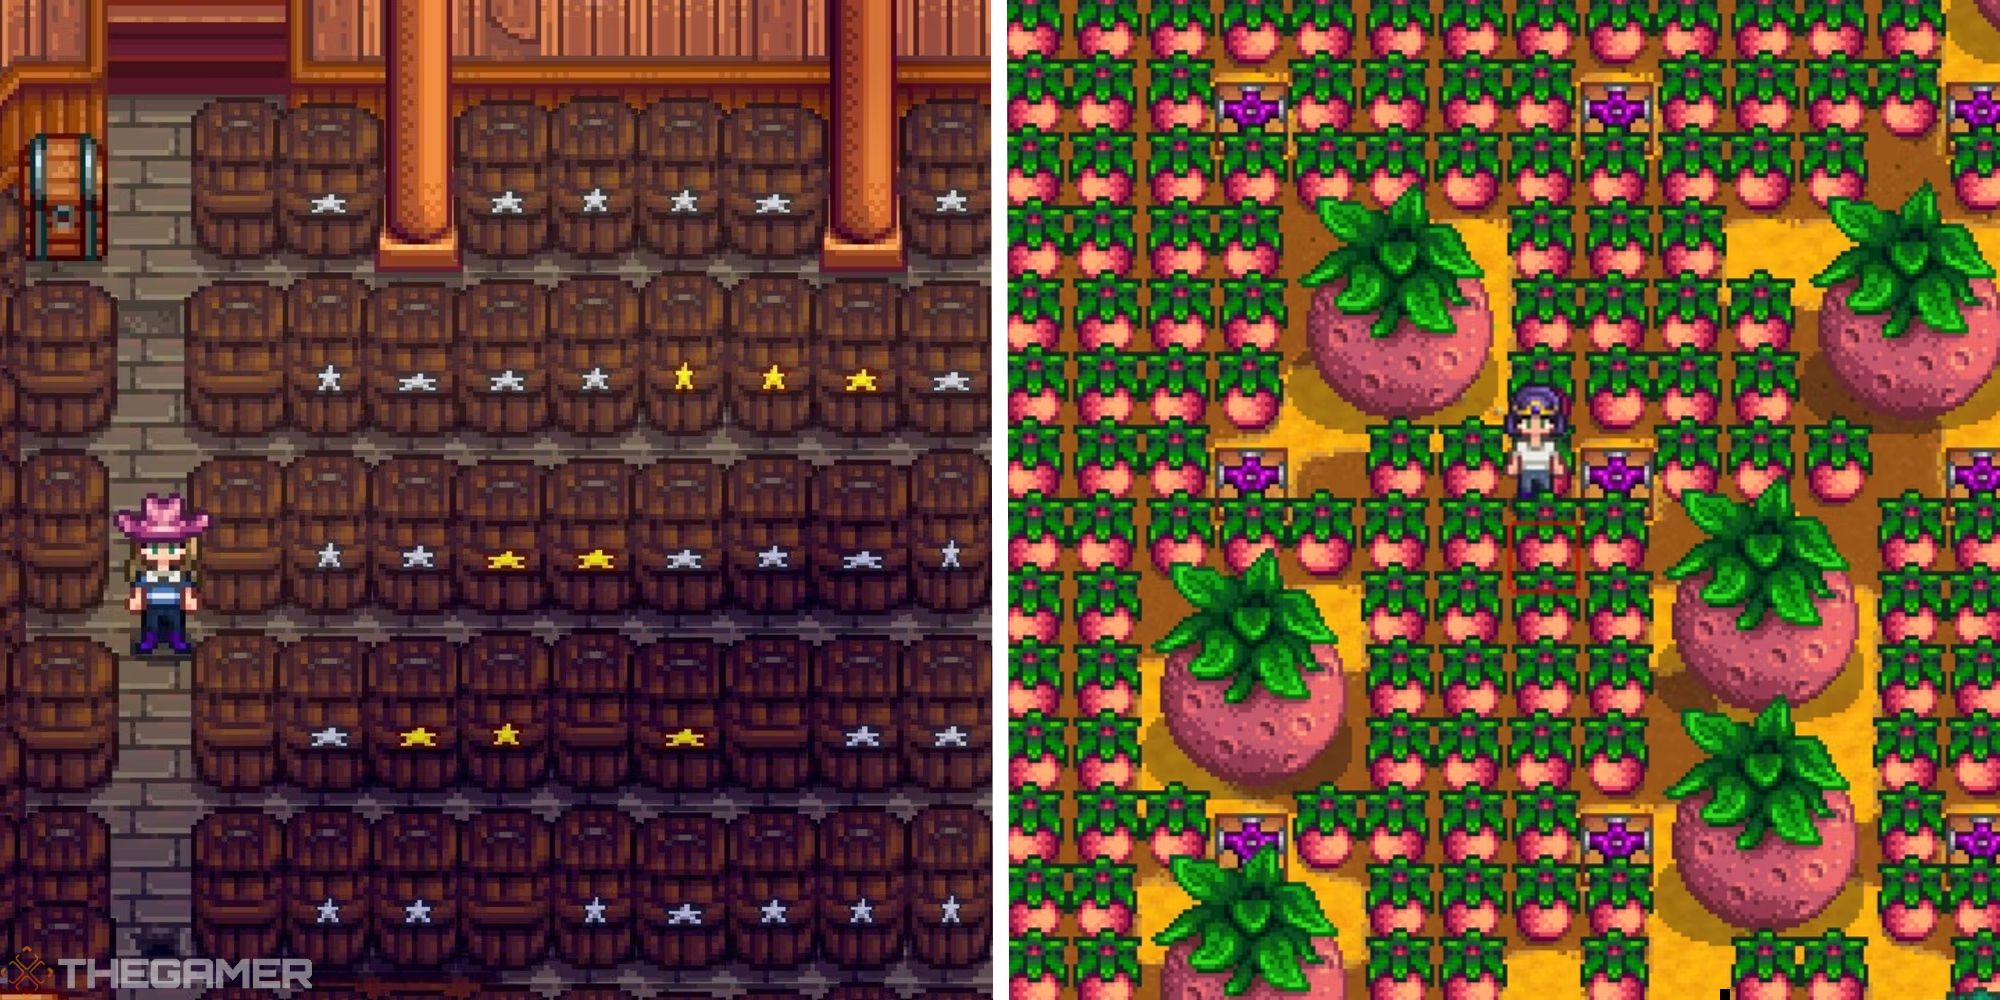 image of player in cask cellar next to image of melon crop fields